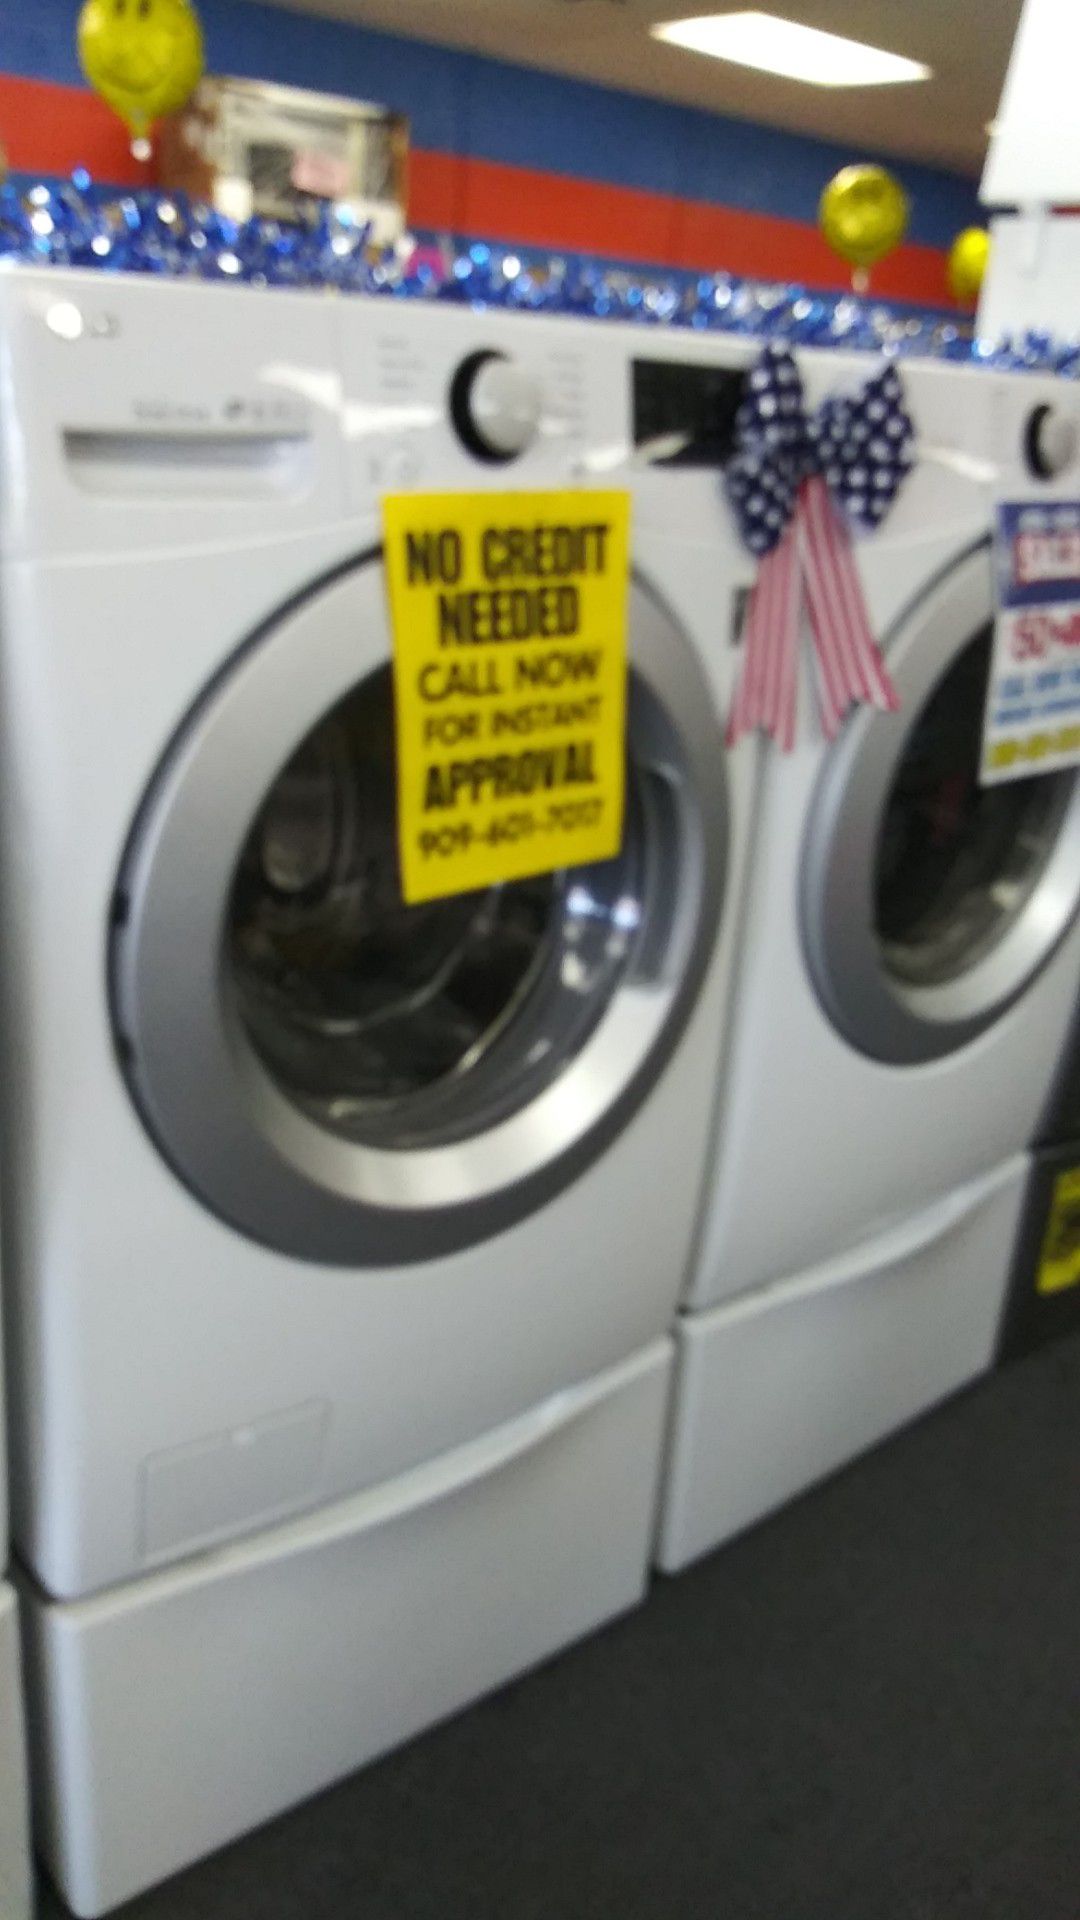 💥4 OF JULY SALE💥LG WASHER AND DRYER 💙BUY NOW PAY LATER💙NO CREDIT NEEDED💙SAME DAY DELIVERY💙 0-40$ DOWN 💙ASK 4 YASMINE 4 DISCOUNT